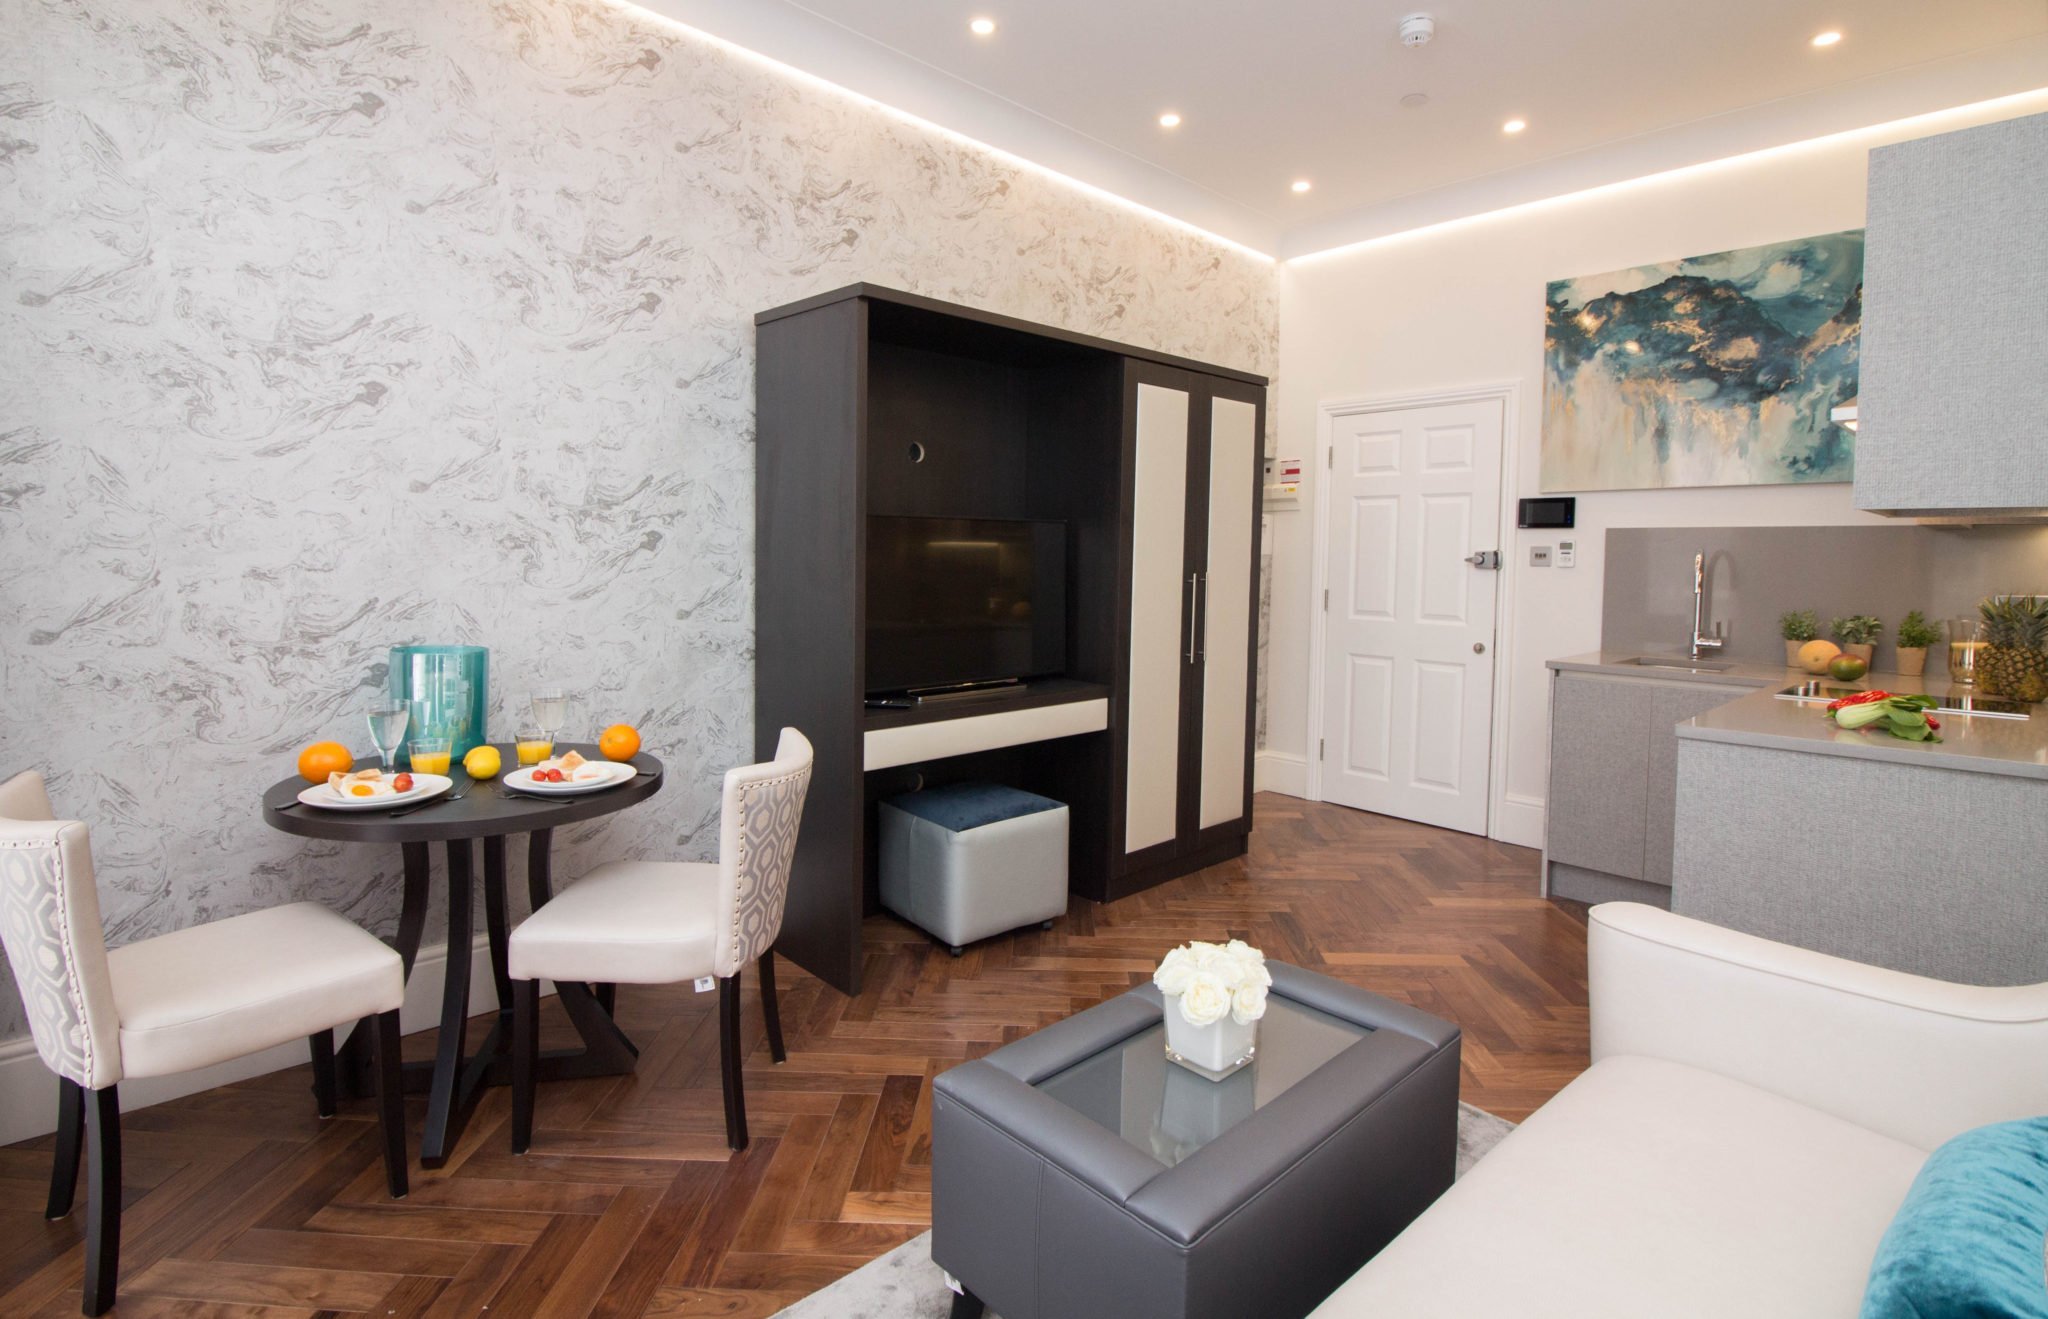 Baker-Street-Serviced-Apartments---Luxury-Self-Catering-Accommodation-Central-London-|-Urban-Stay